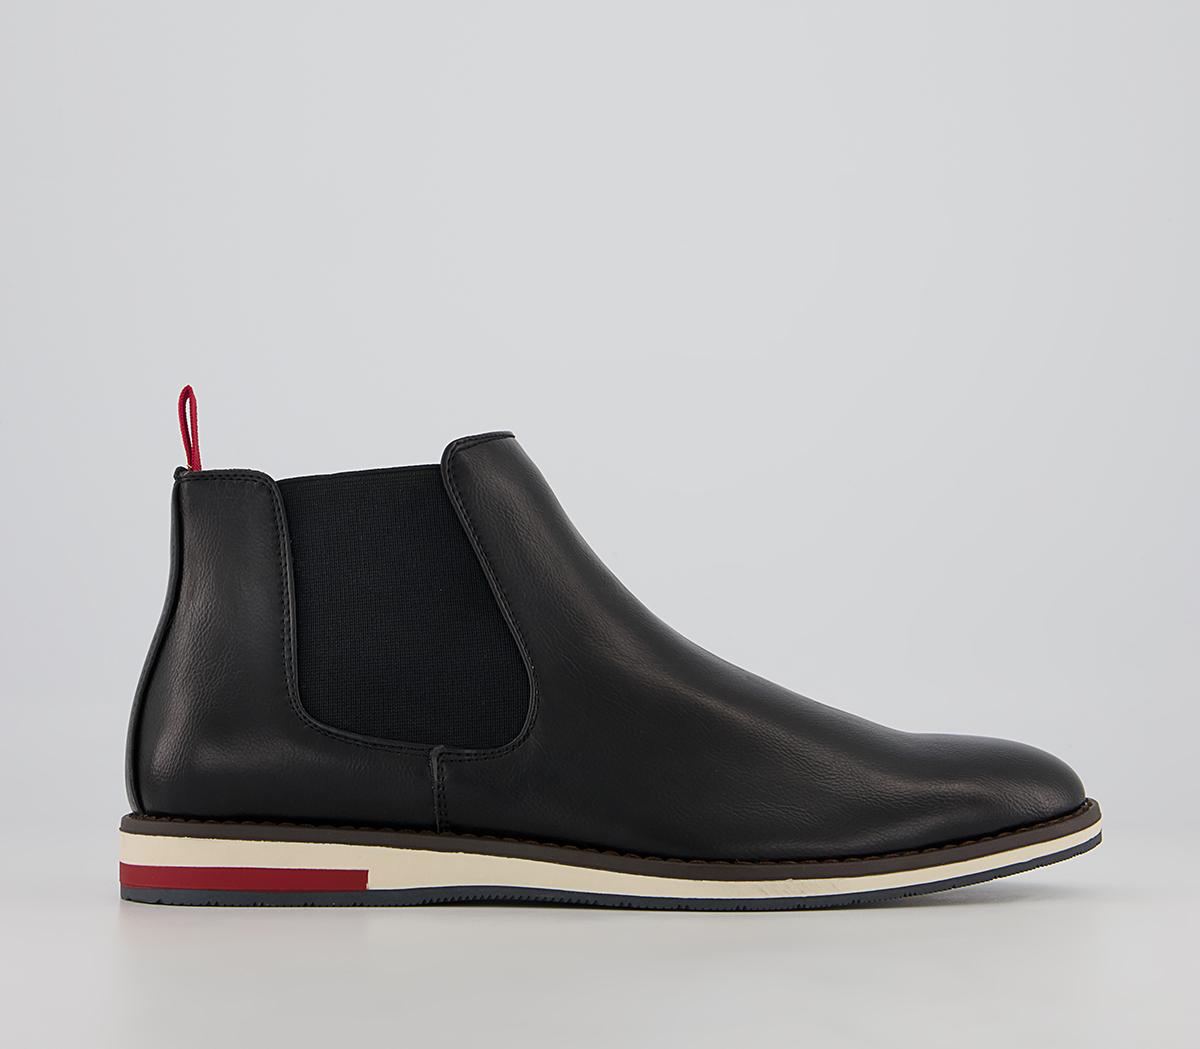 OFFICE Brussels Hybrid Sole Chelsea Boots Black - Men’s Boots